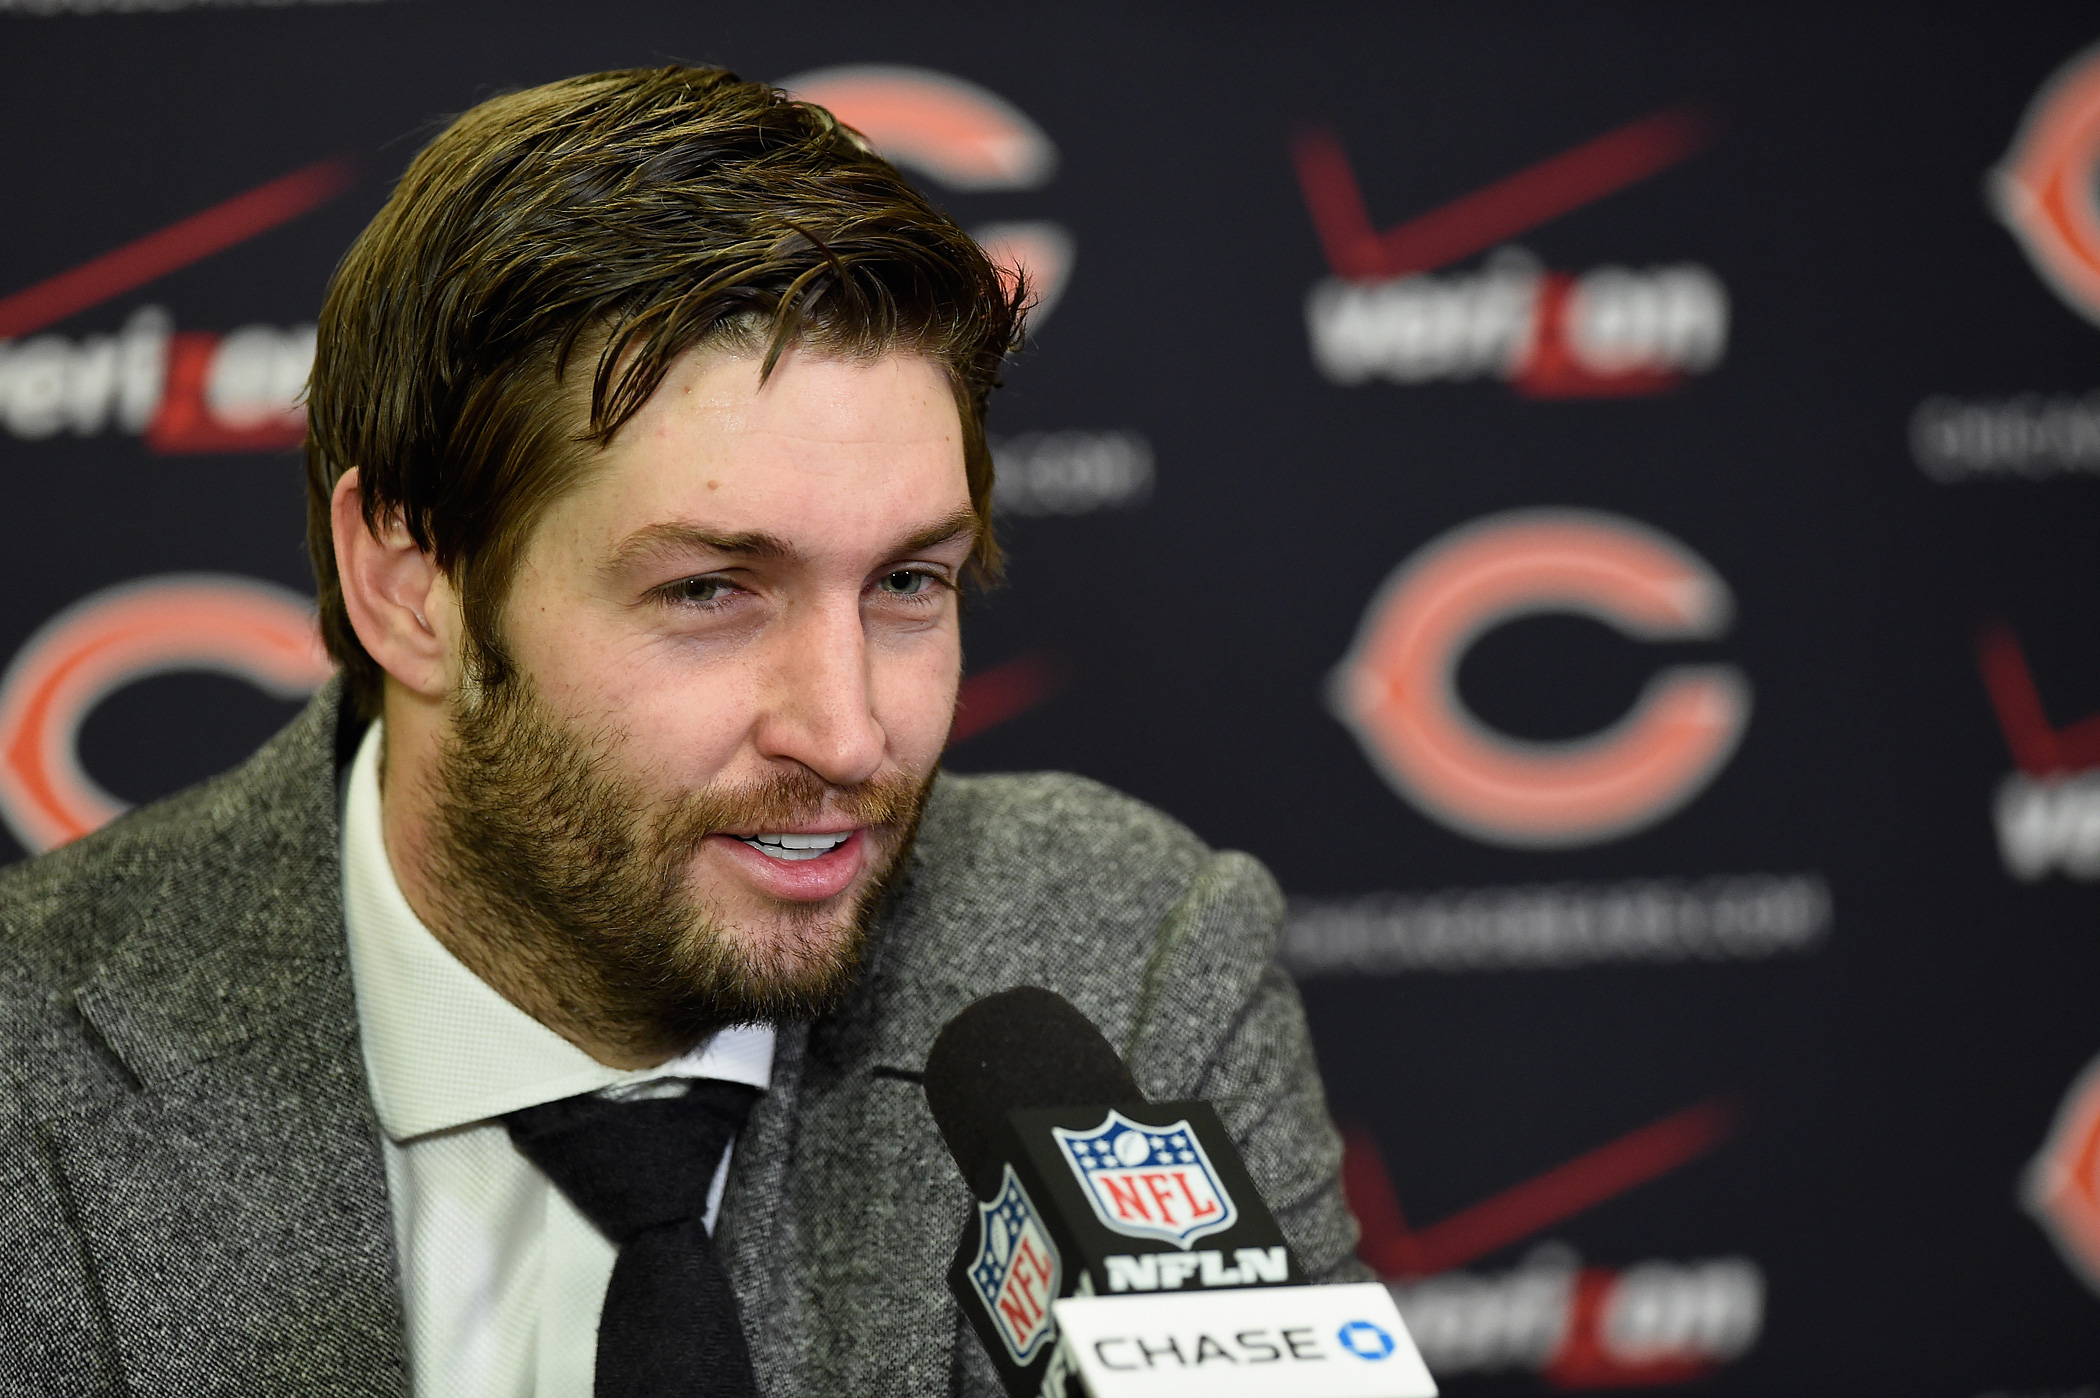 Jay Cutler of the Chicago Bears speaks to the media after the game against the Minnesota Vikings on Dec.28, 2014 at TCF Bank Stadium in Minneapolis, MN. (Hannah Foslien—Getty Images)